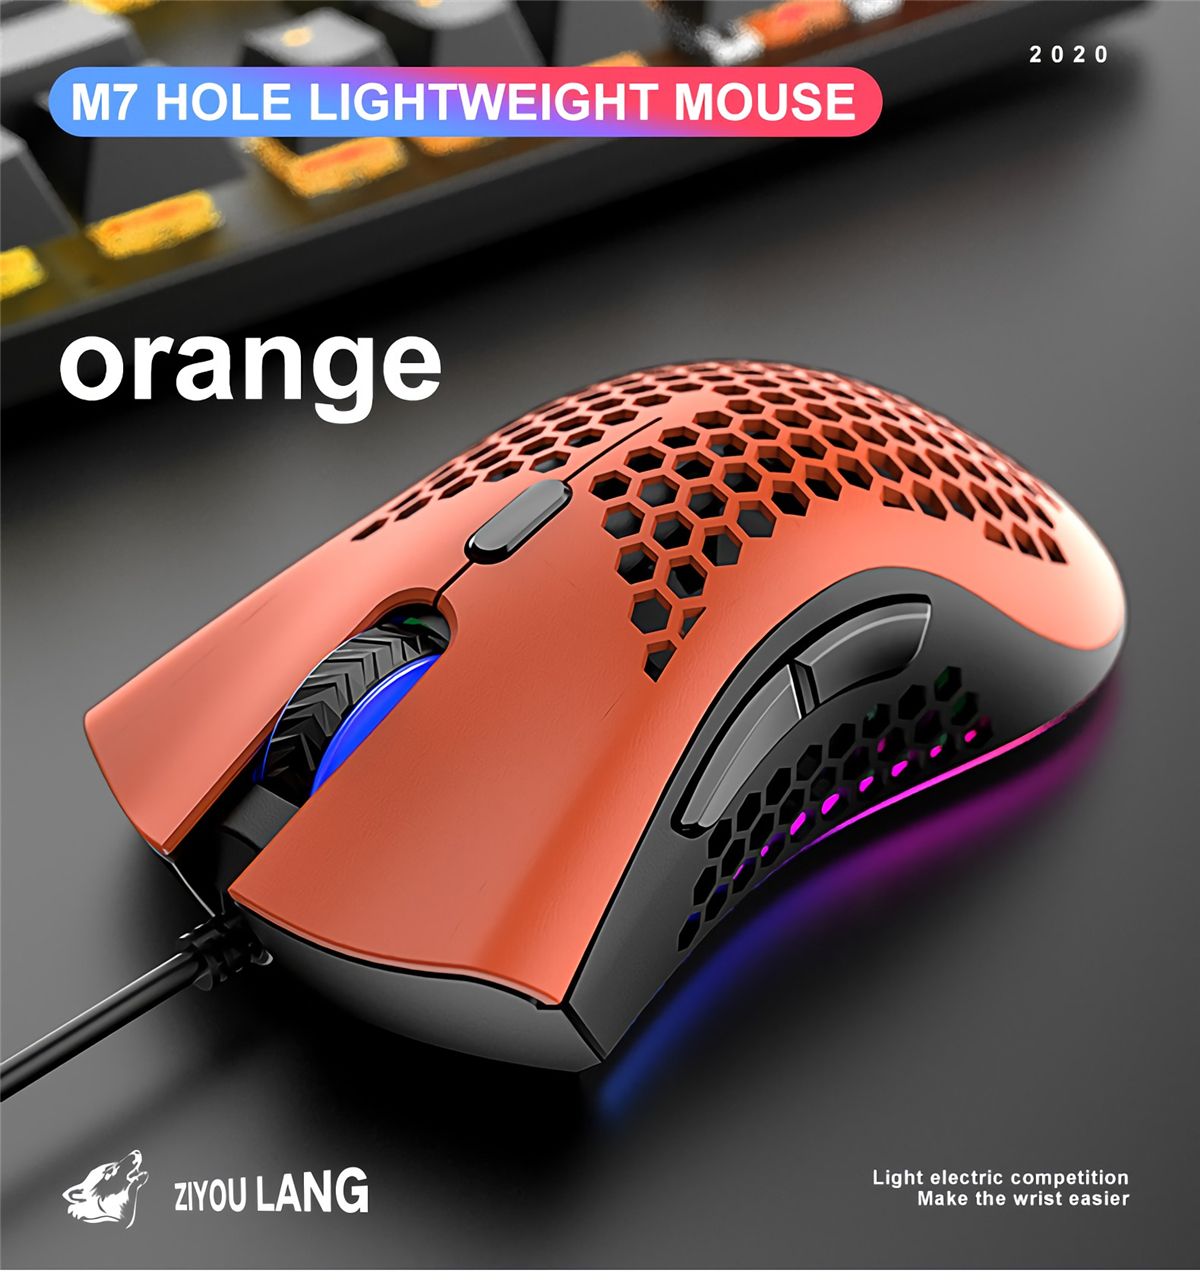 Freewolf-M7-Gaming-Mouse-Wired-12000DPI-RGB-Backlight-Computer-Mouse-Lightweight-Hollow-Honeycomb-Mi-1738471